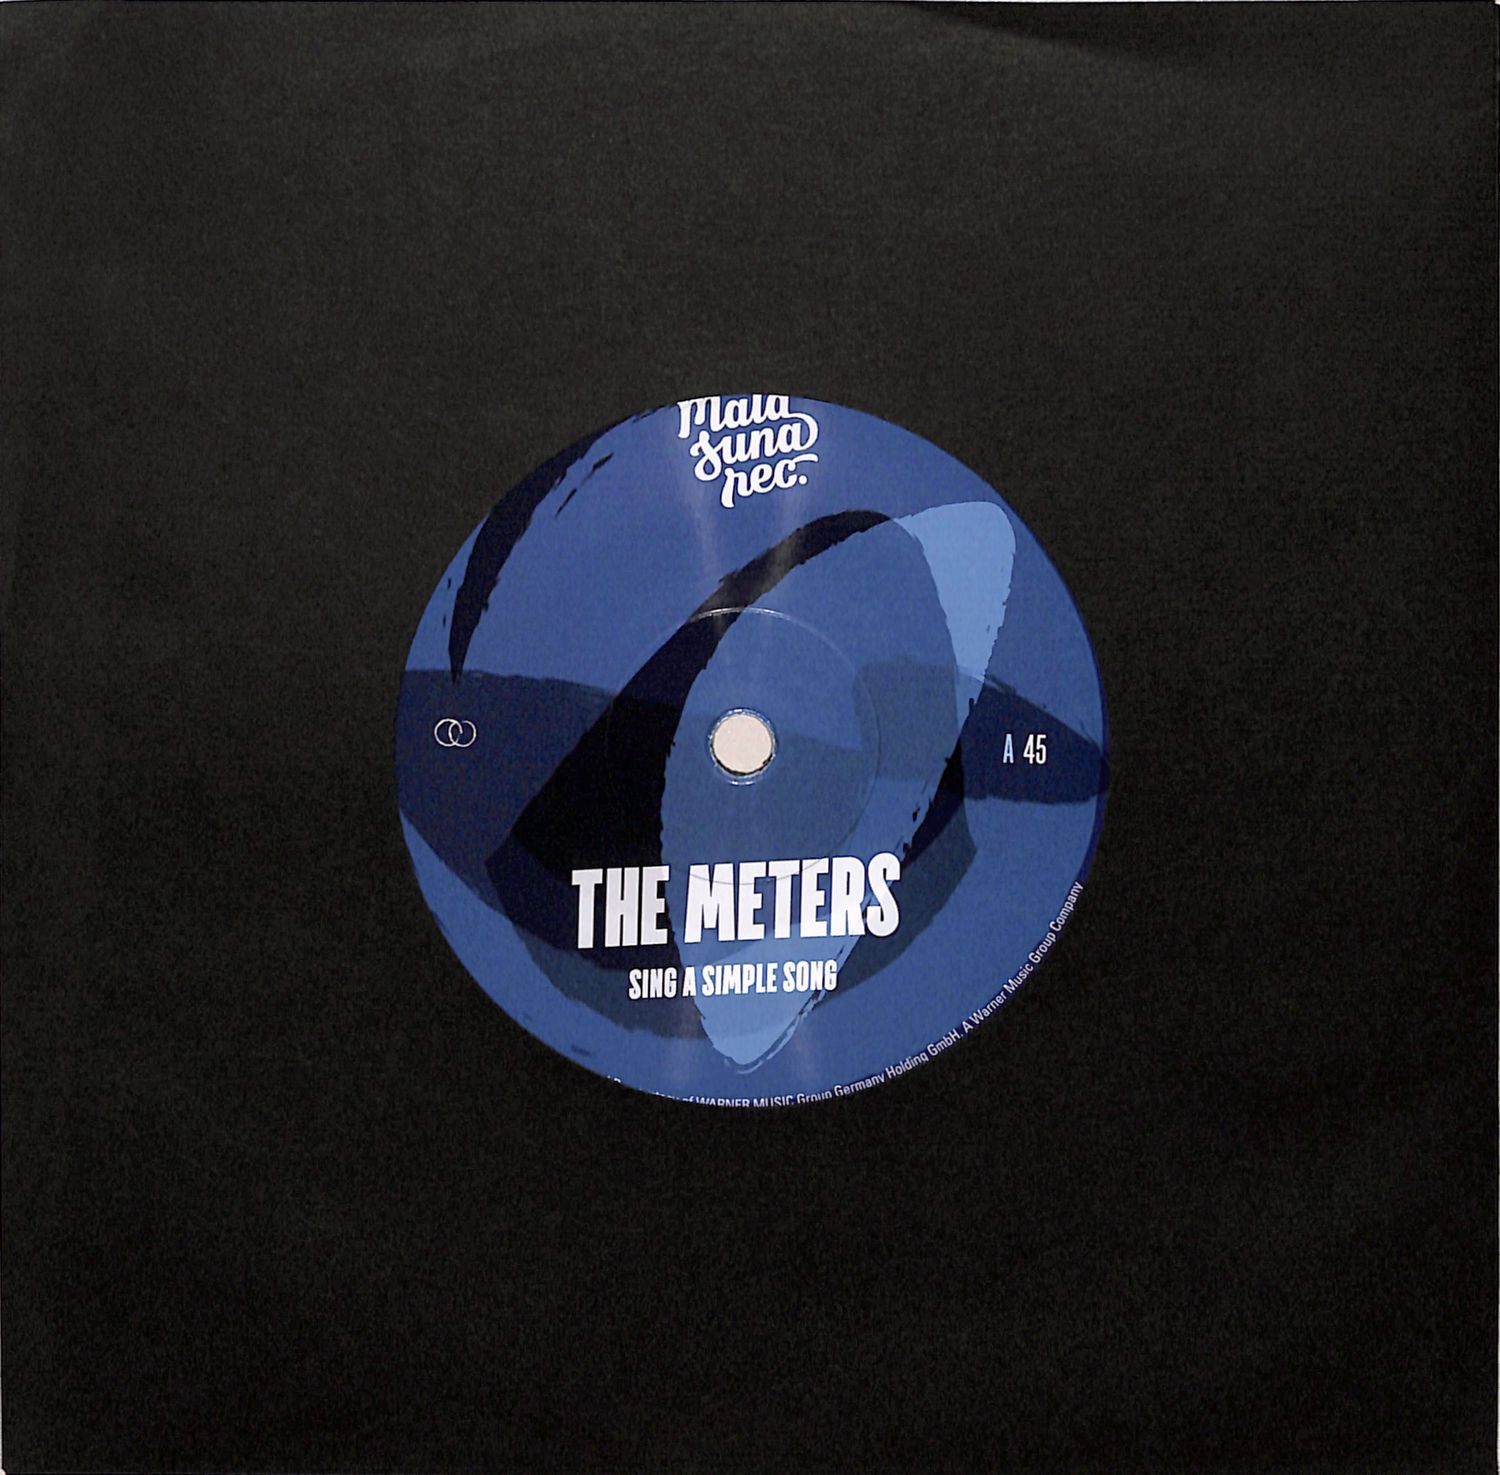 The Meters & The Watts 103rd Street Rhythm Band - SING A SIMPLE SONG / GIGGIN DOWN 103RD 